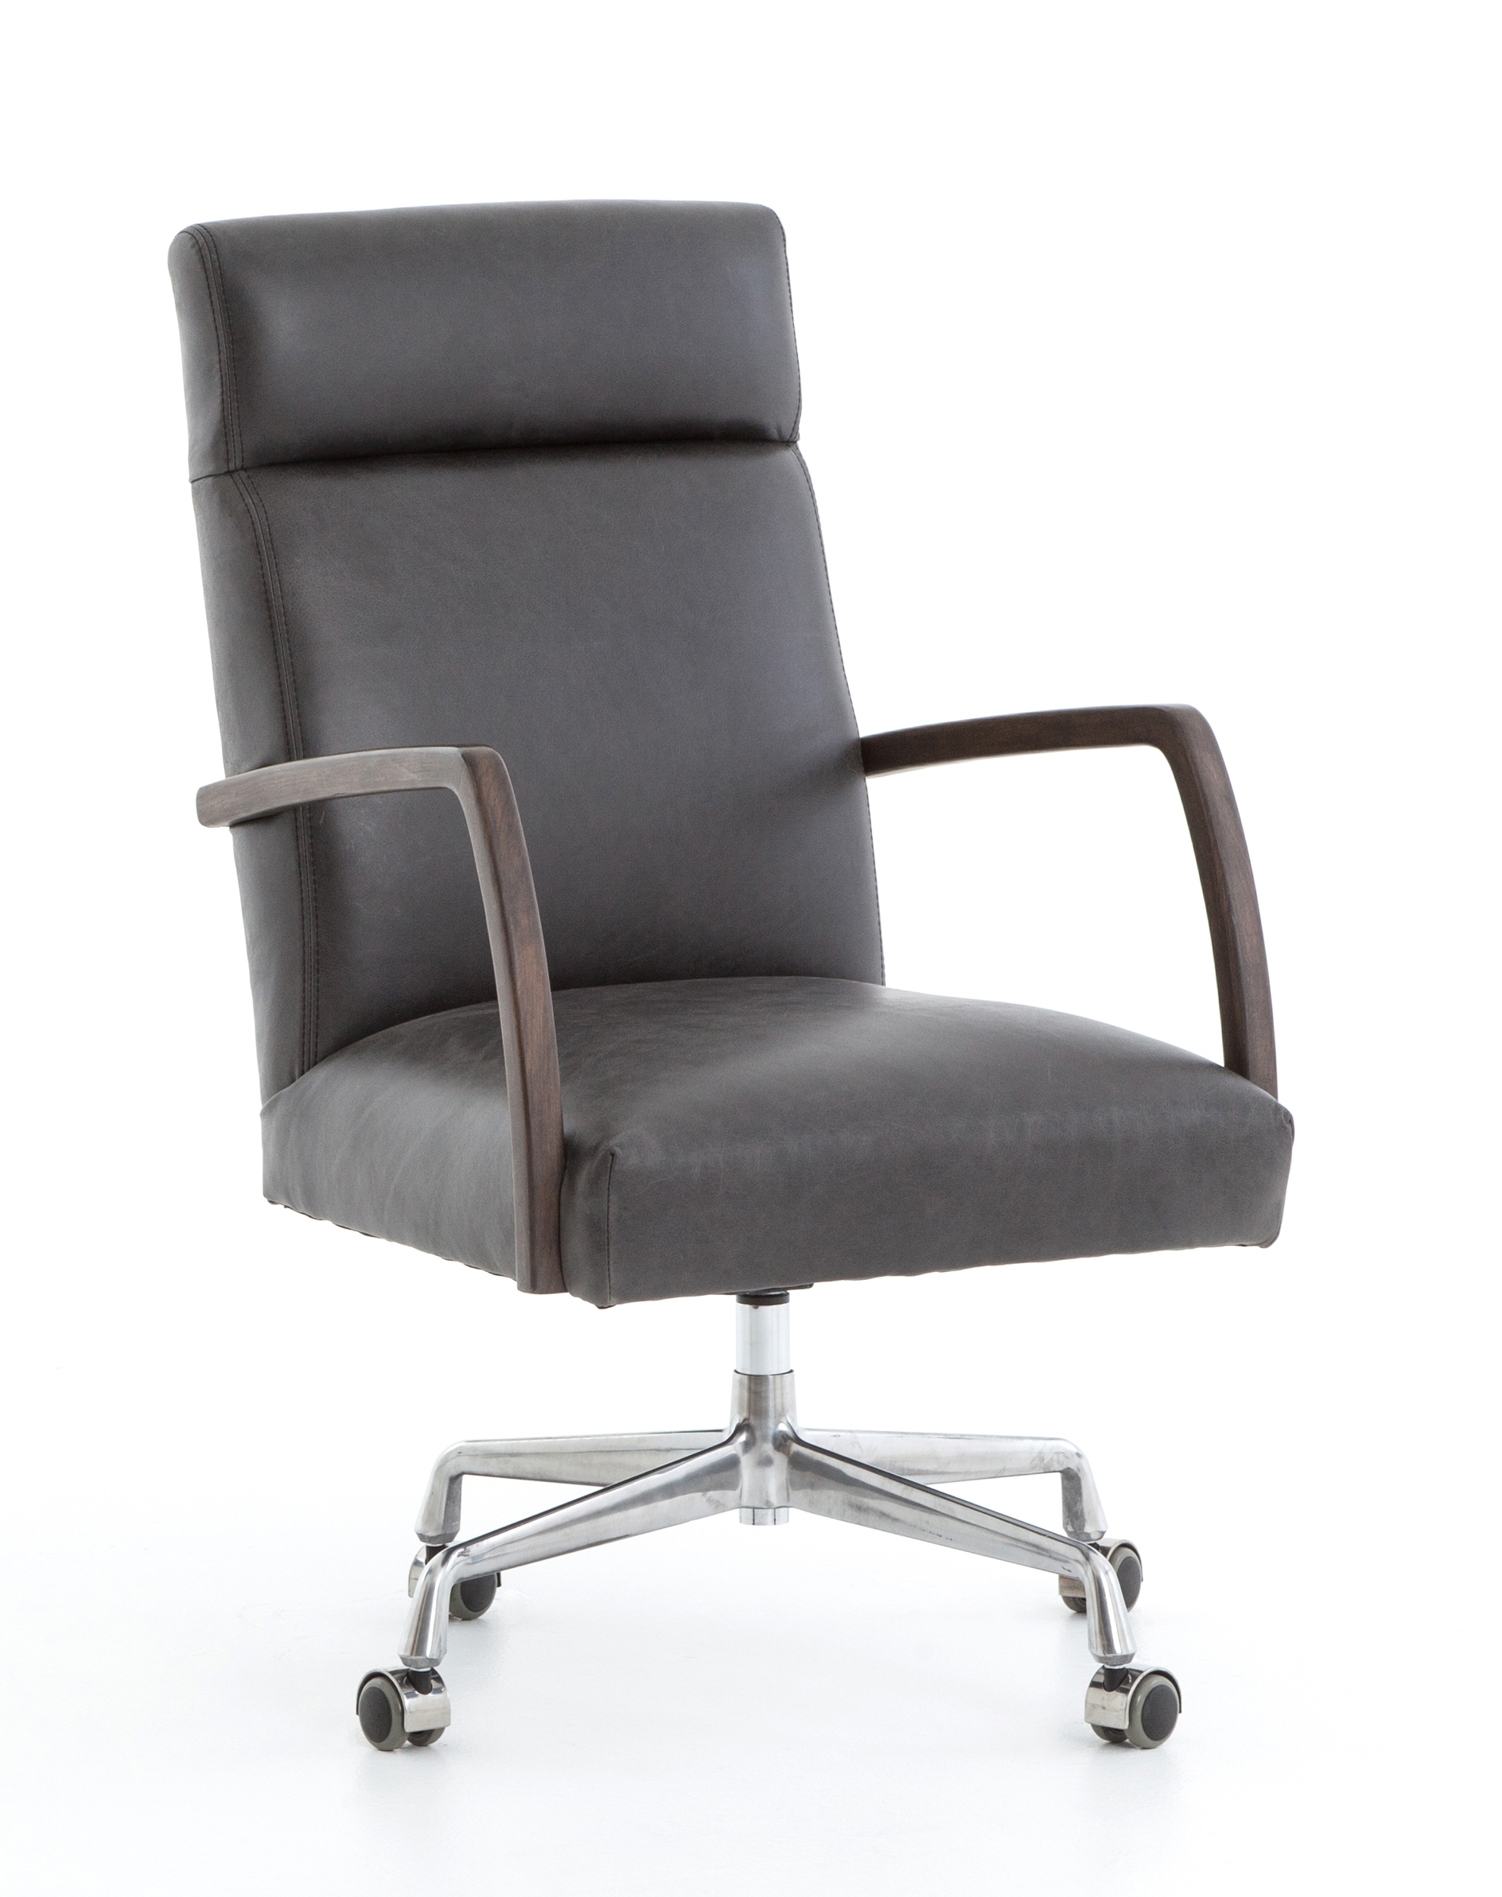 Camden Leather Office Chair, Ebony - Image 3